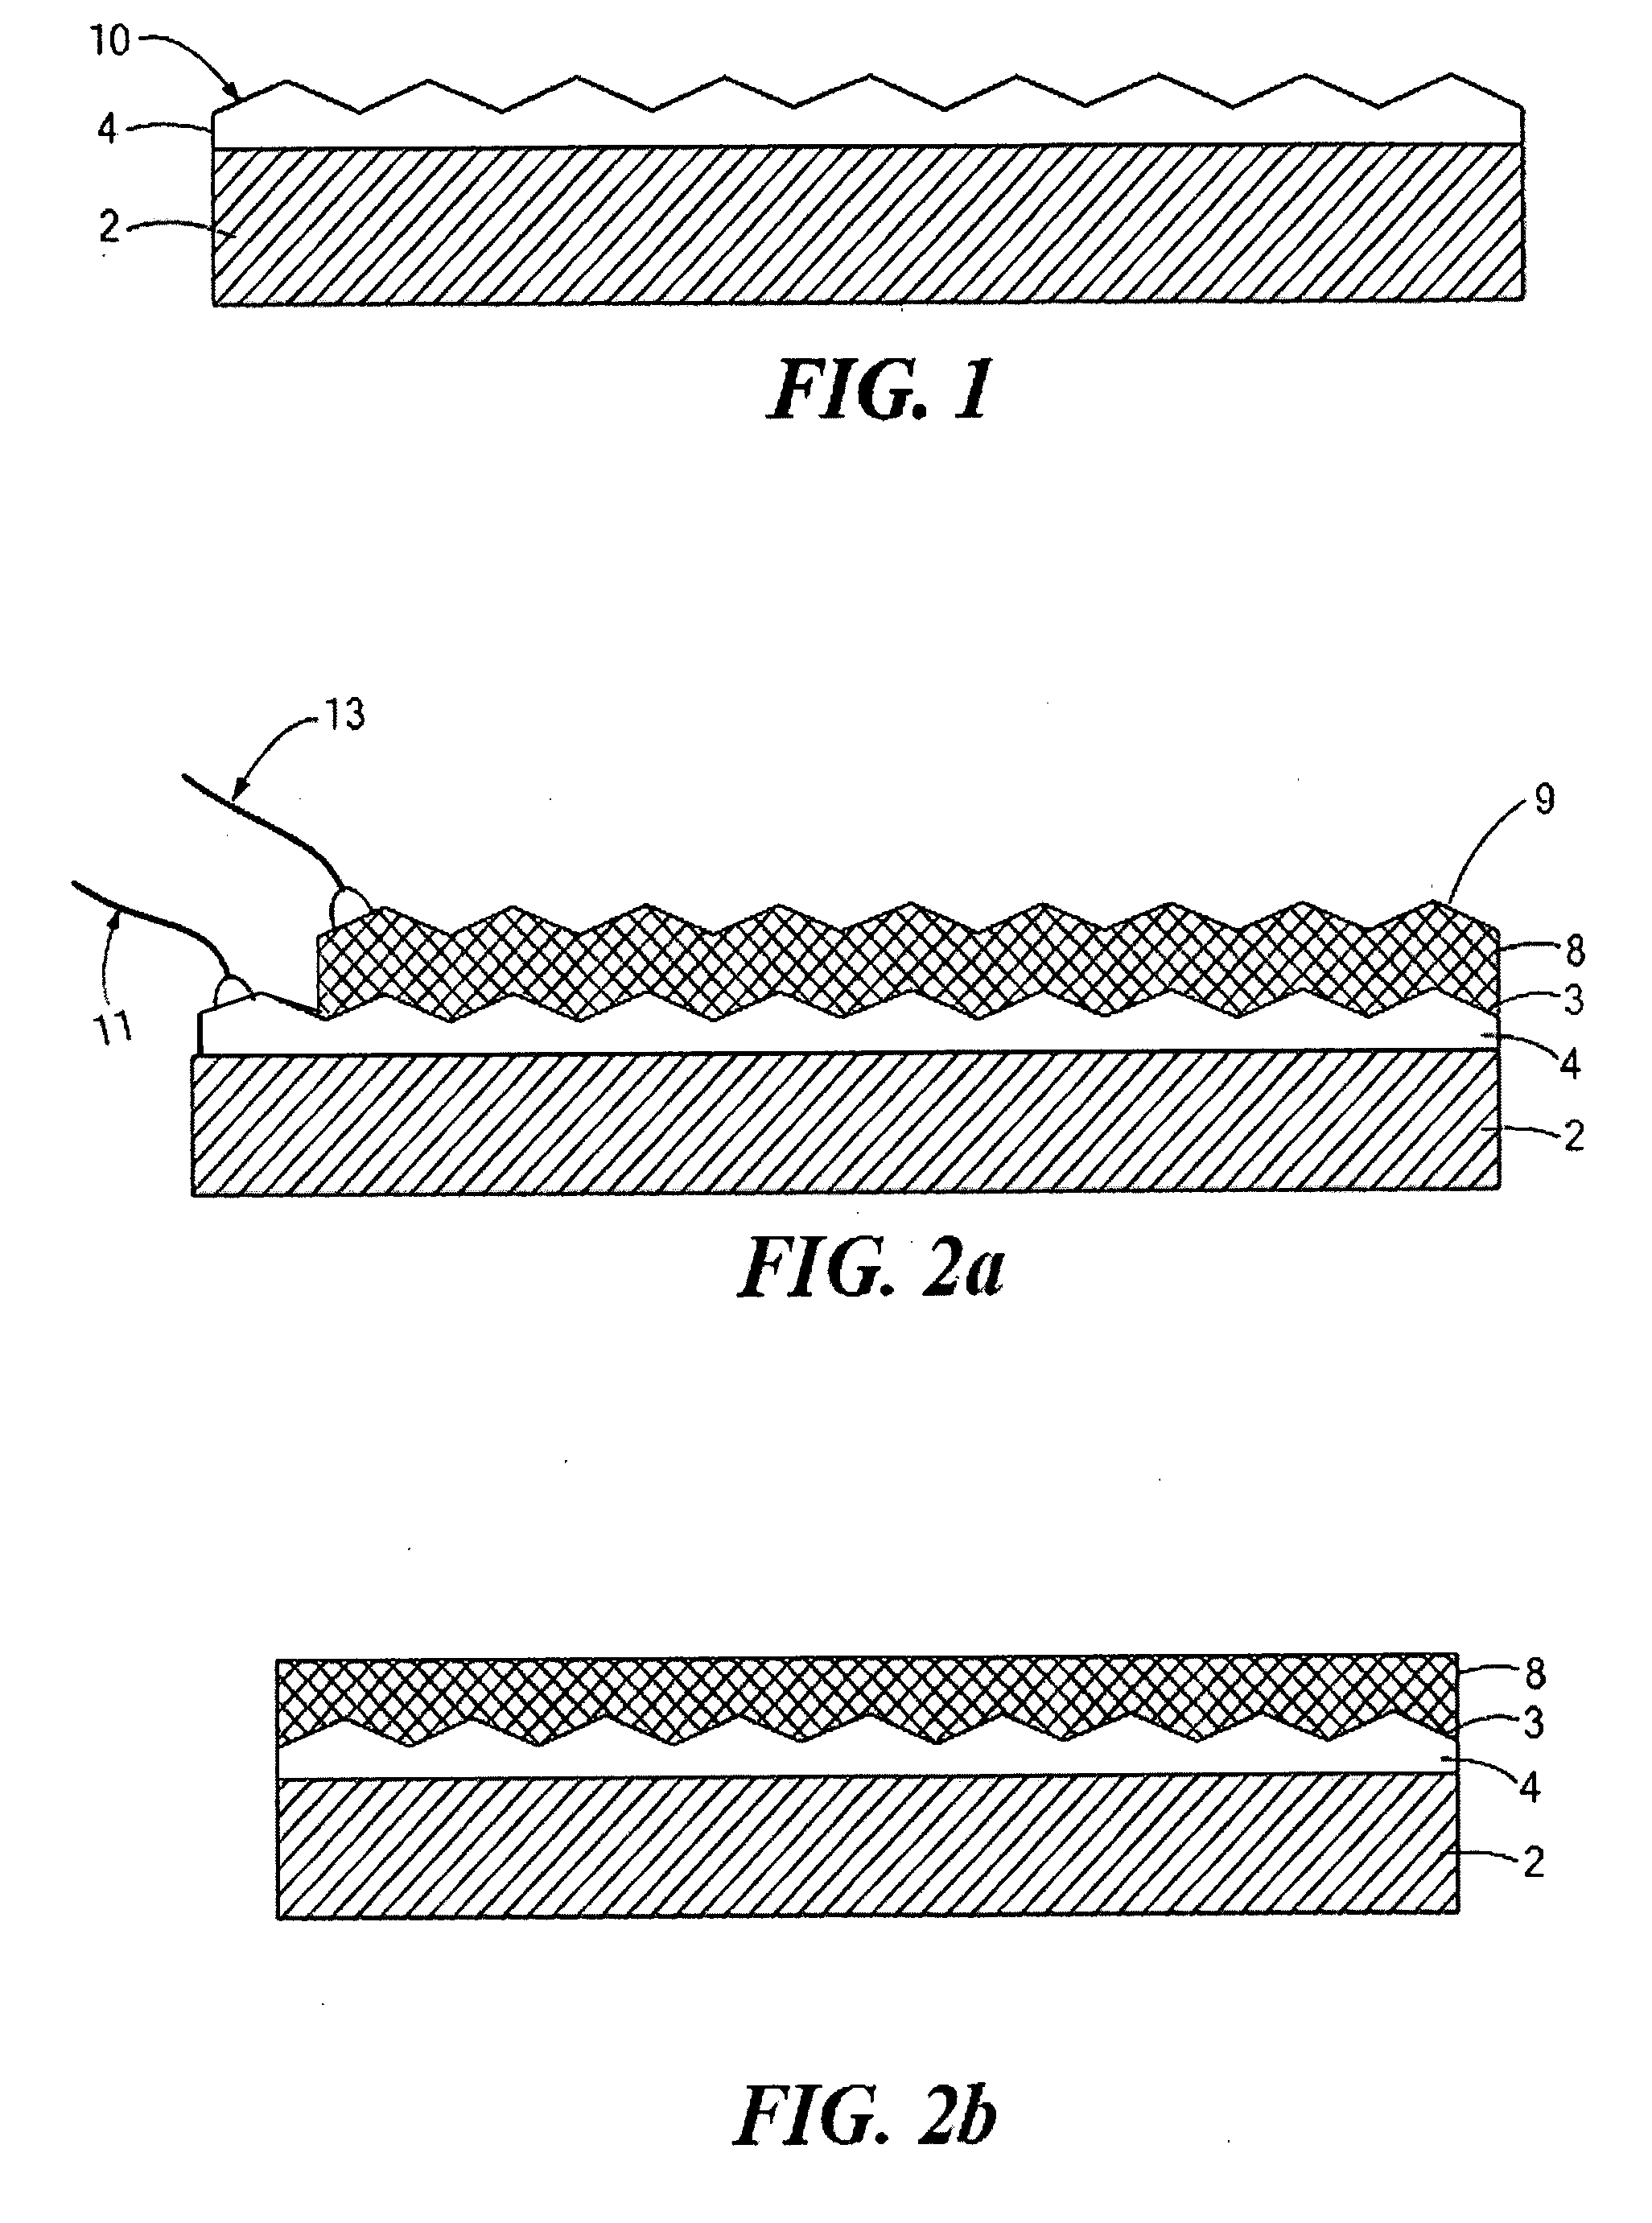 Optical devices featuring textured semiconductor layers